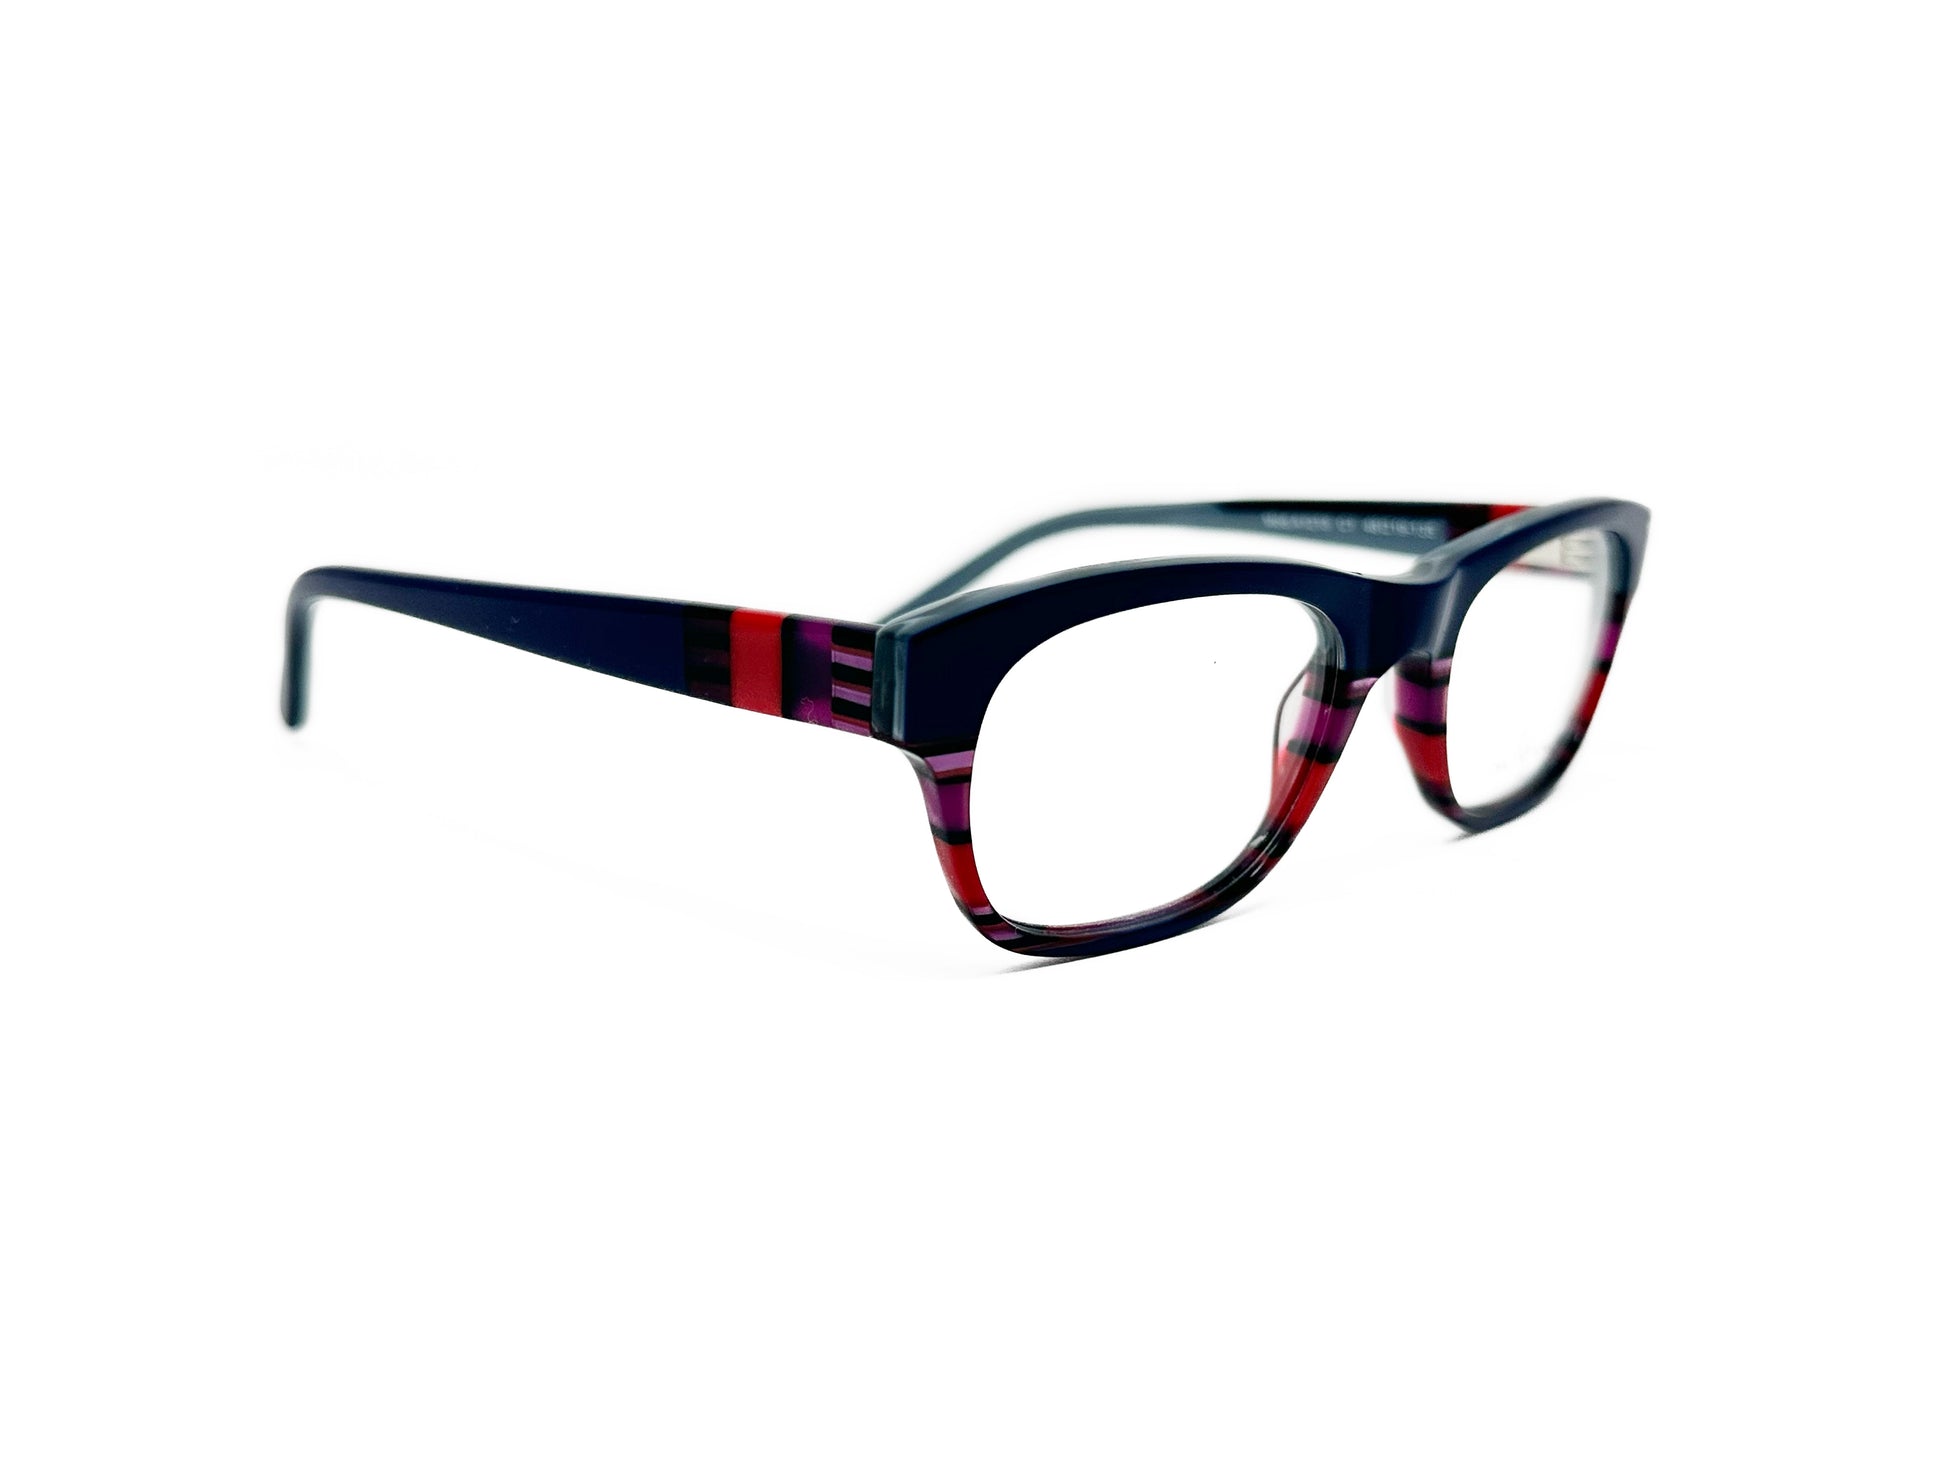 Outspoken rounded square, acetate optical frame. Model: A1213. Color: C1 - Black, red, and blue striped. Side view.